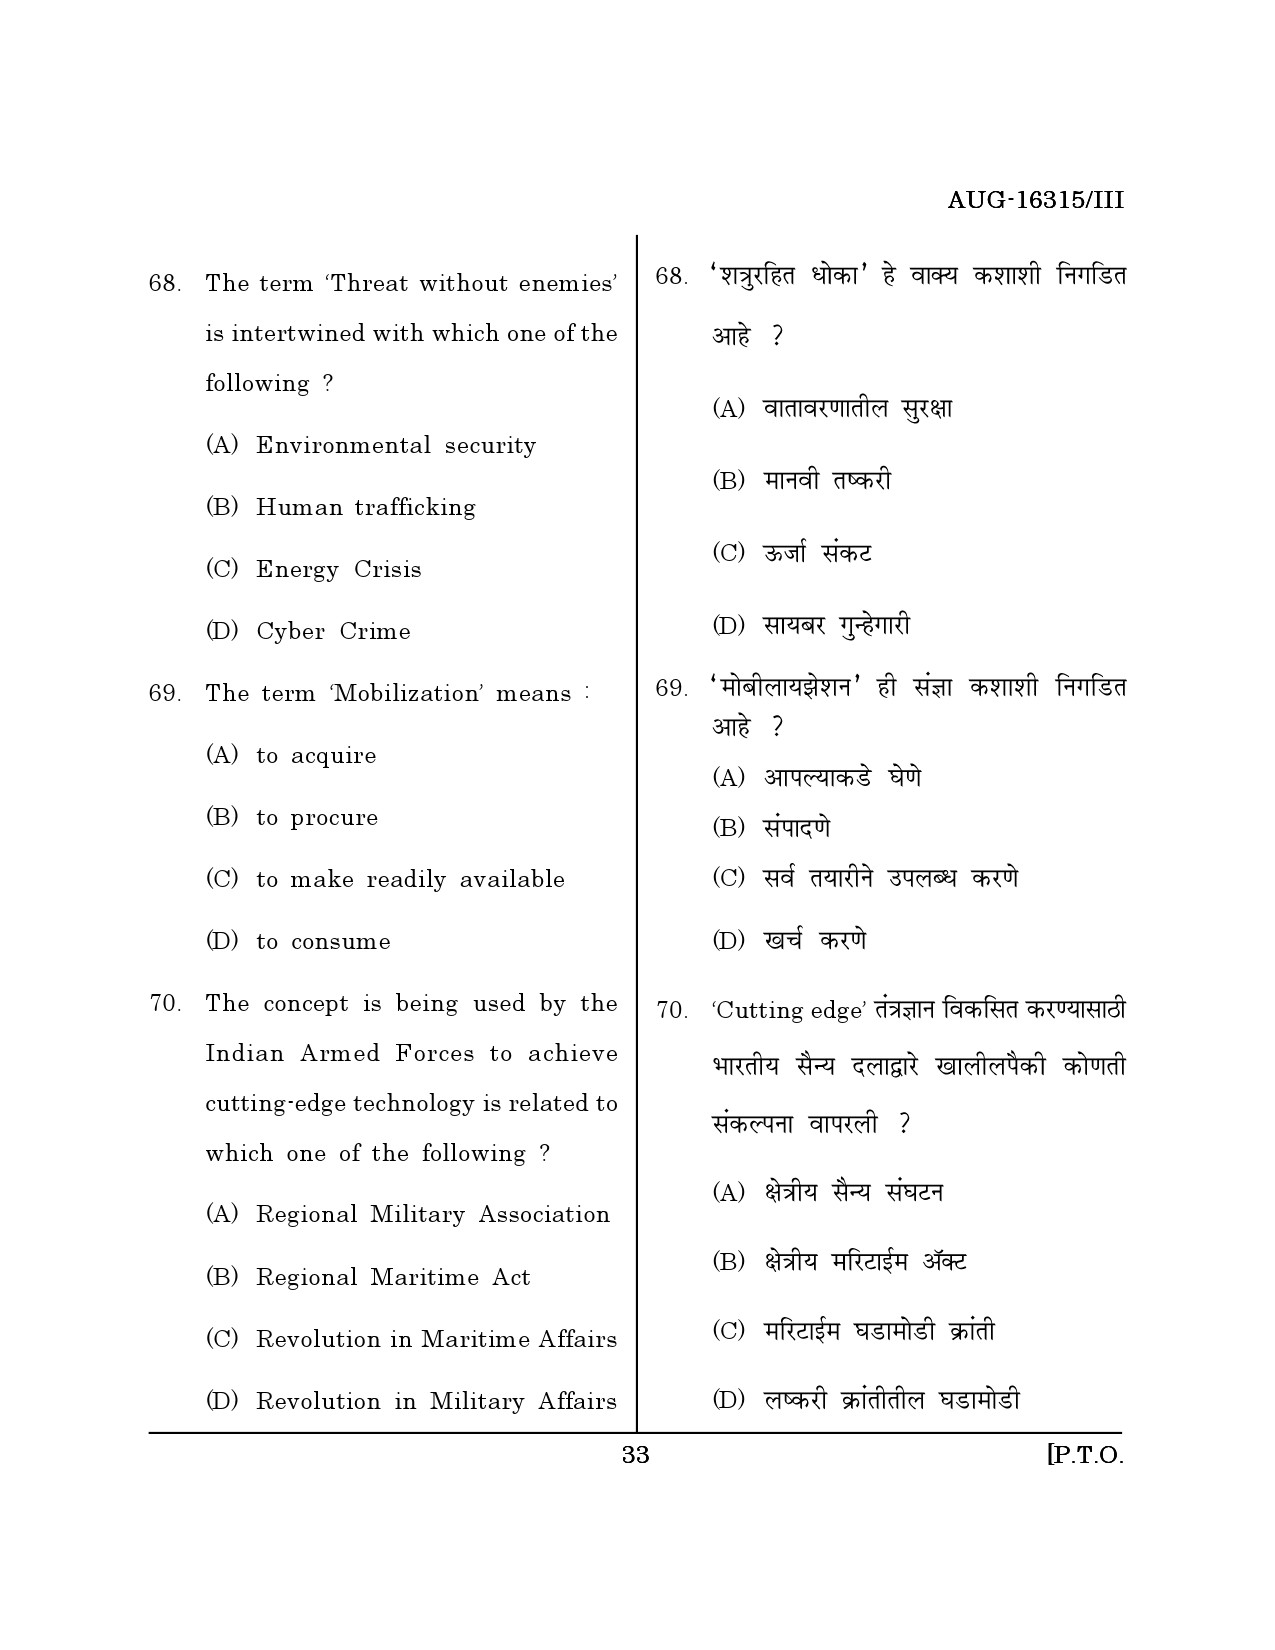 Maharashtra SET Defence and Strategic Studies Question Paper III August 2015 32